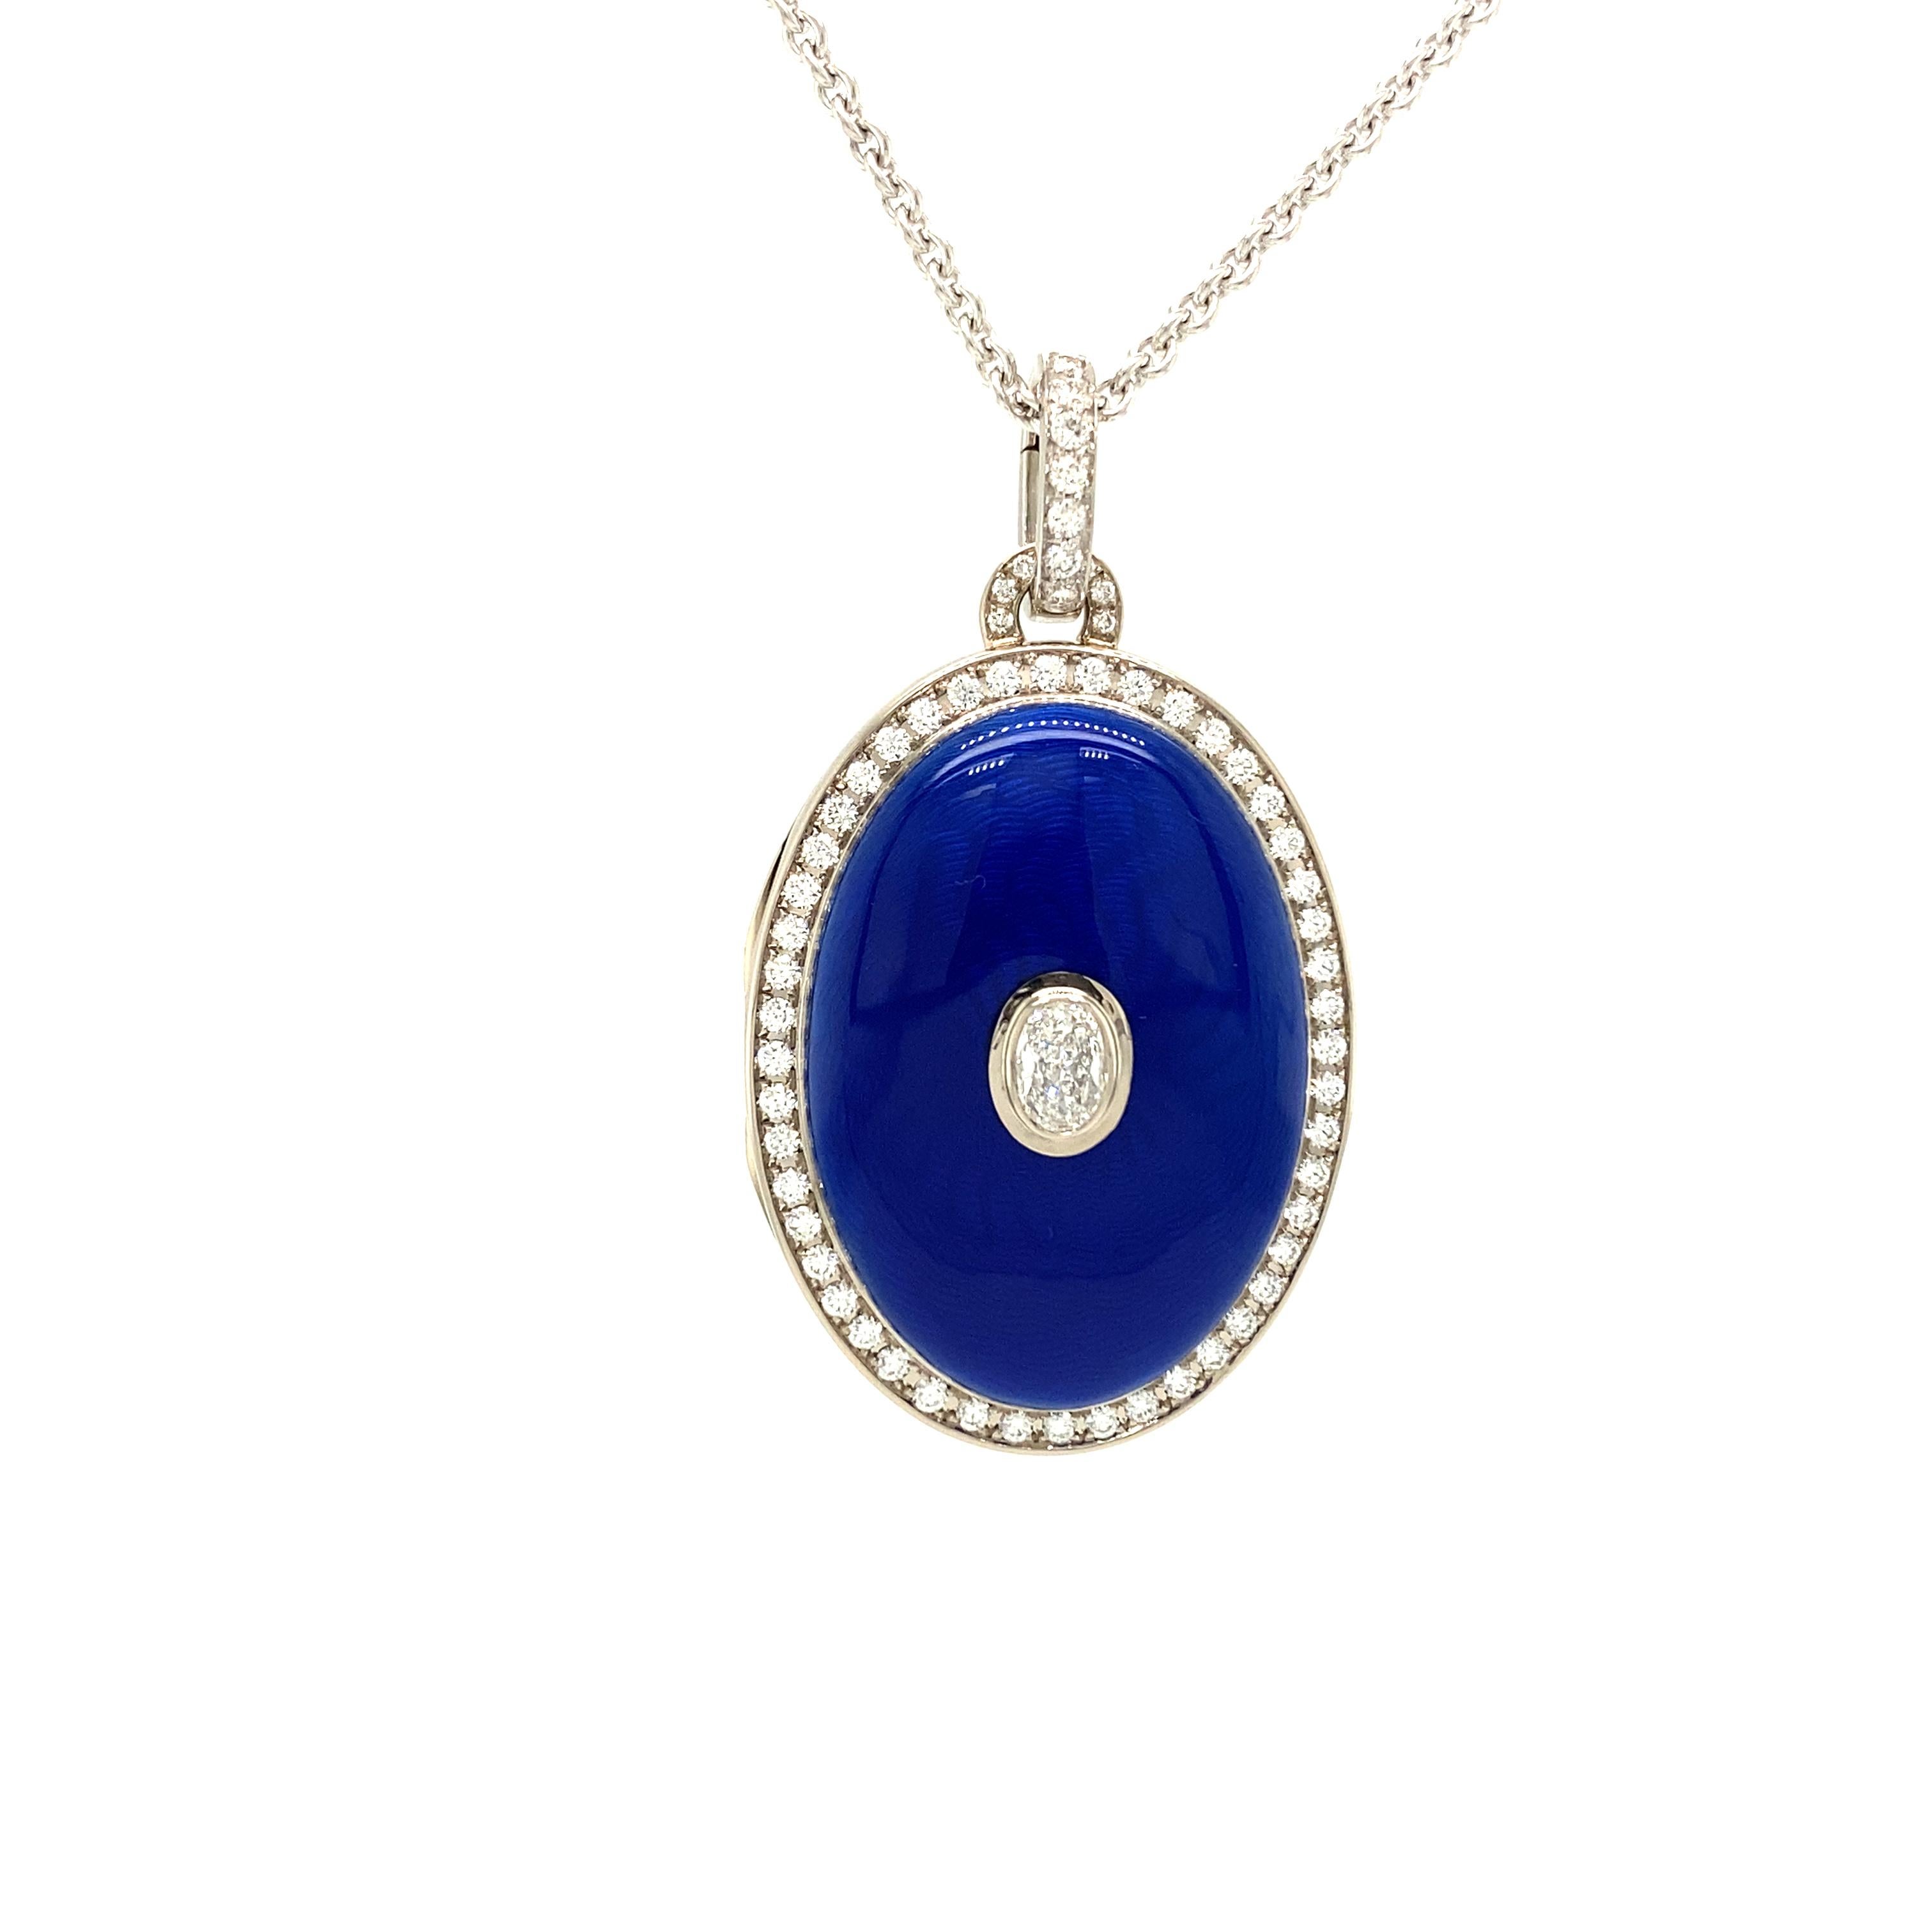 Oval locket pendant necklace by VICTOR MAYER, Opera Collection, in 18kt white gold with electric blue vitreous enamel over guilloche engraving and 65 brillian cut diamonds

About the creator Victor Mayer
Victor Mayer is internationally renowned for